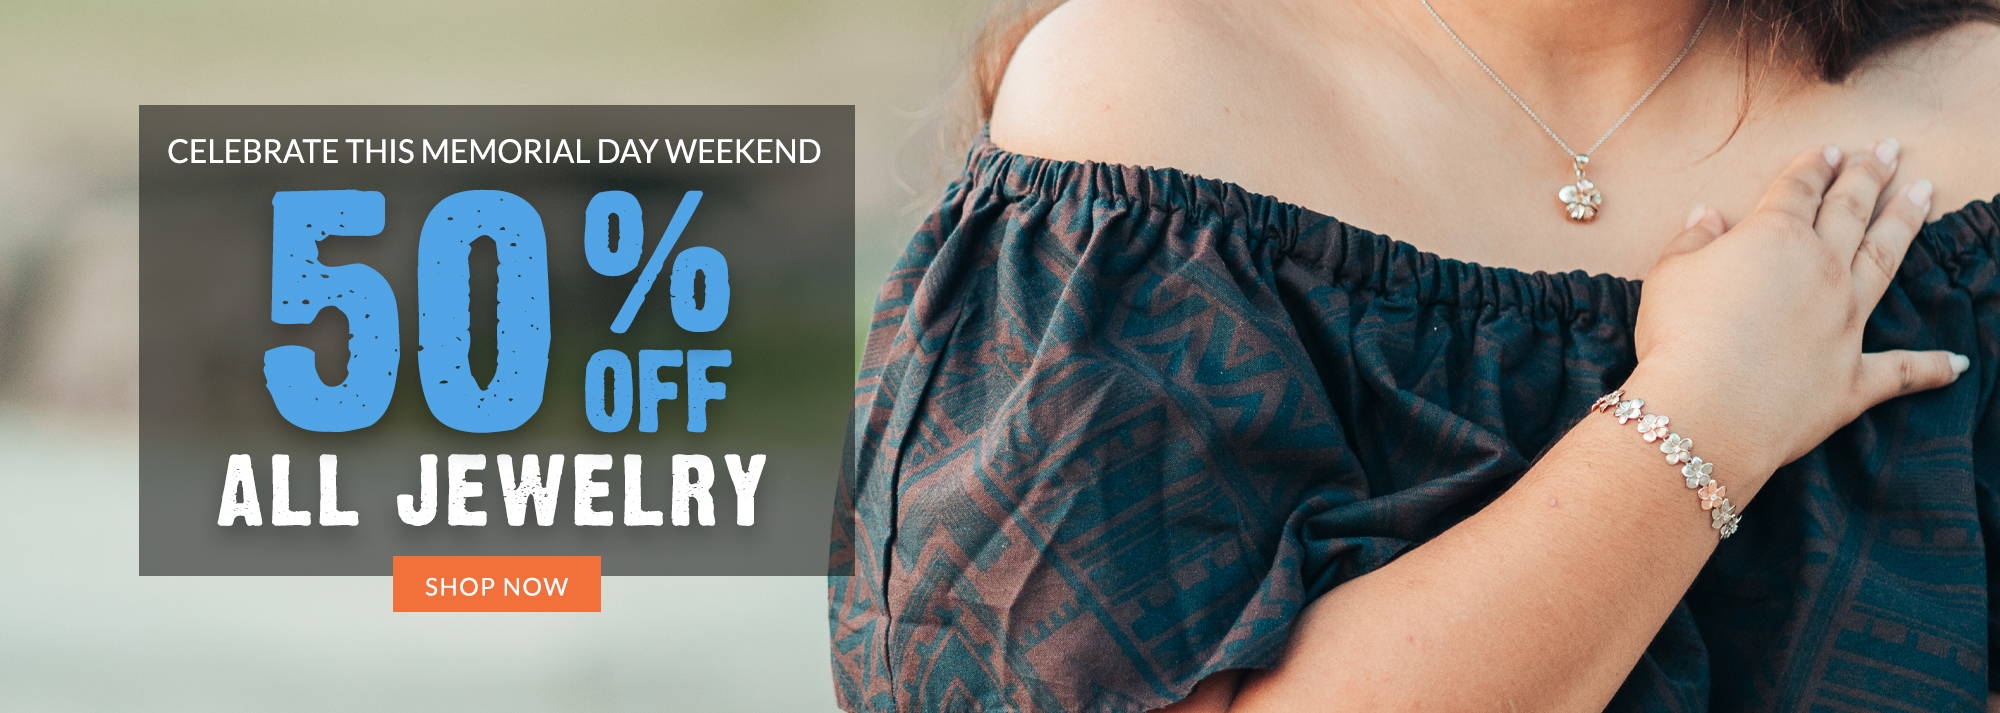 Celebrate this Memorial Day Weekend with 50% off ALL Jewelry